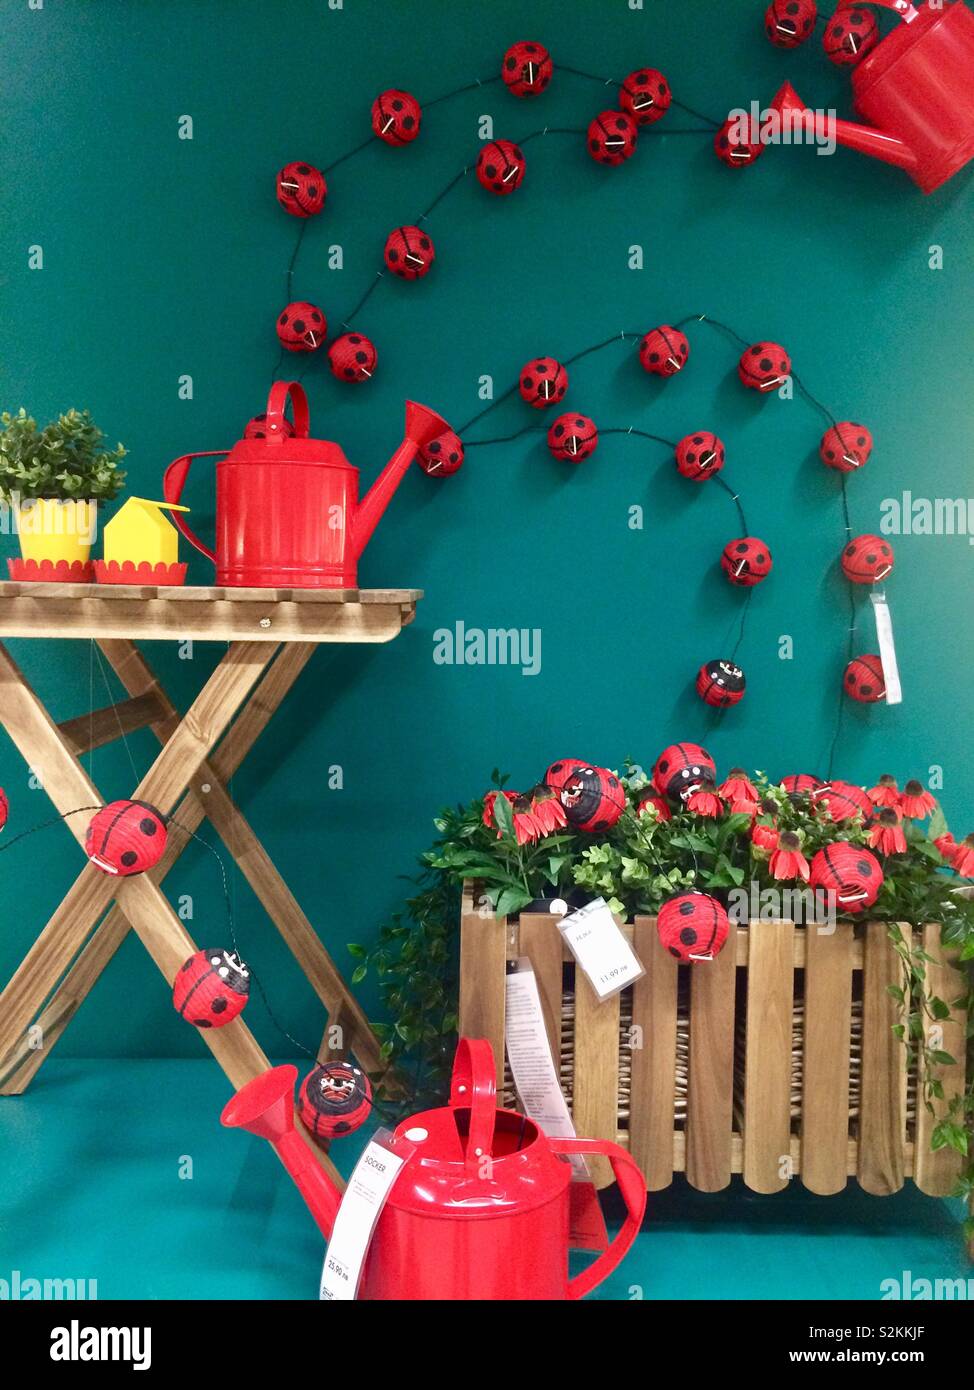 Ikea springtime decoration showroom layout with ladybirds mini lamps on teal coloured wall. Stock Photo